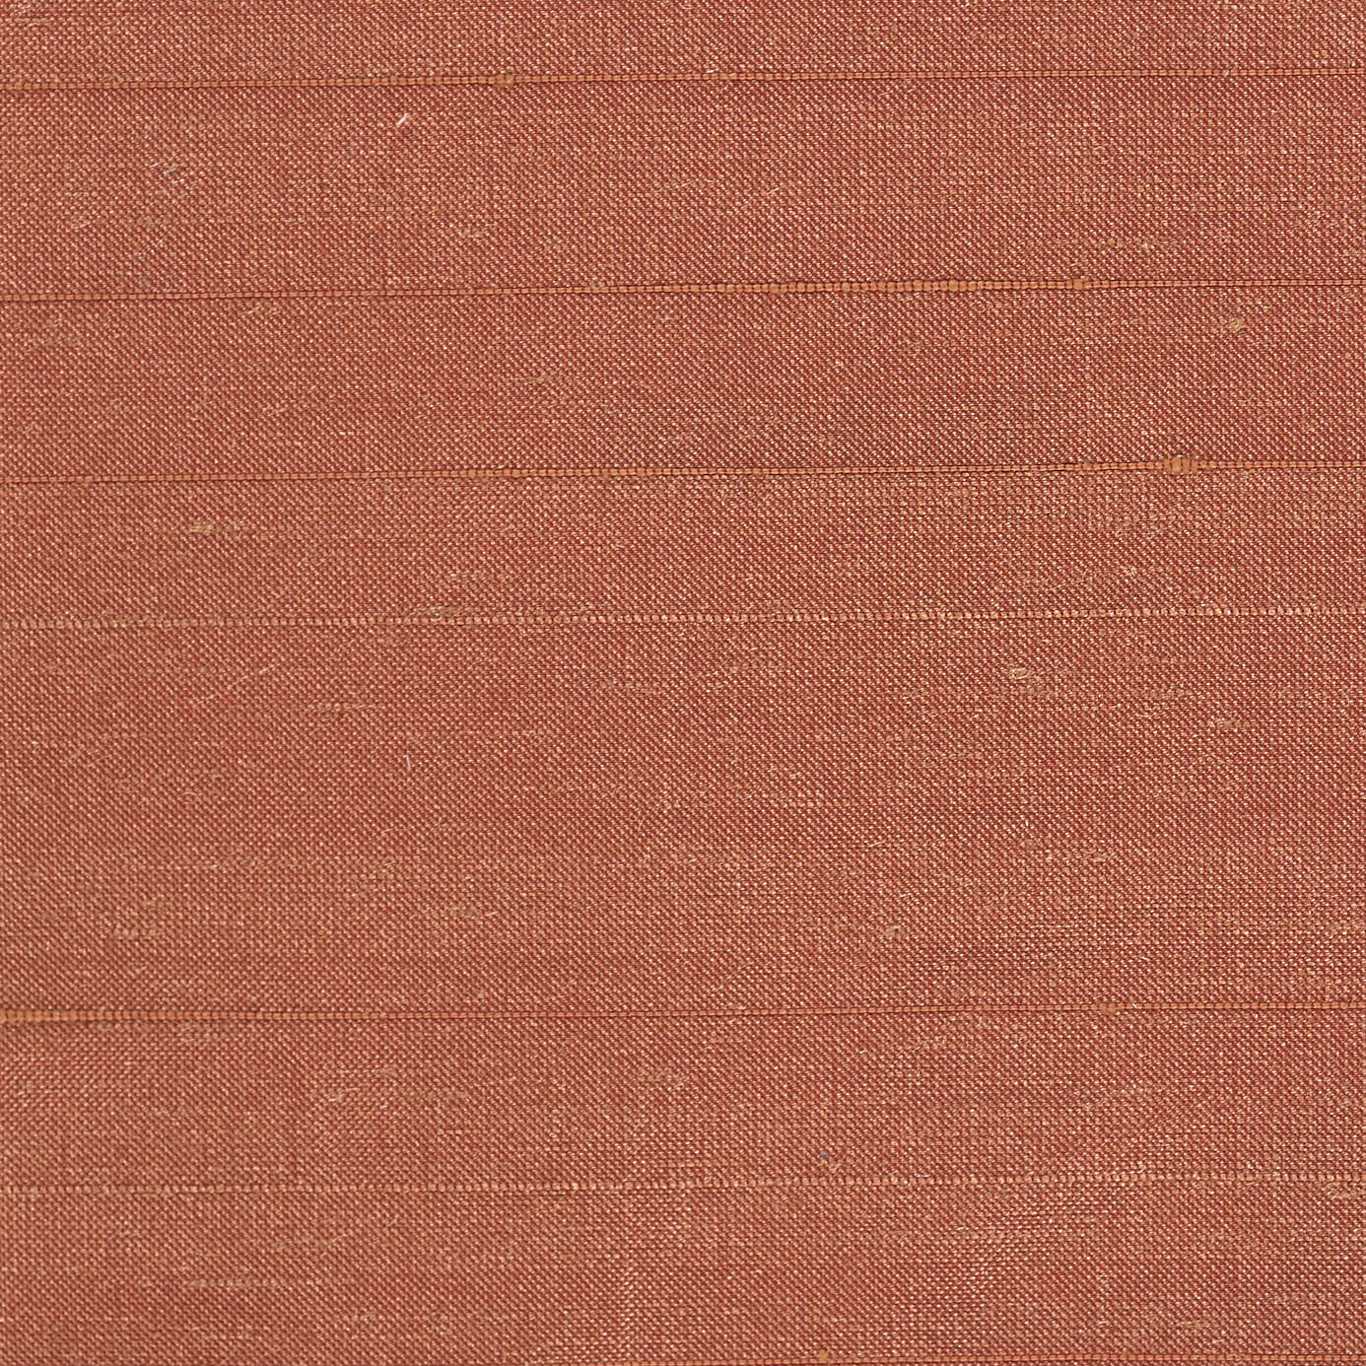 Deflect Fabric by Harlequin - HPOL440475 - Copper